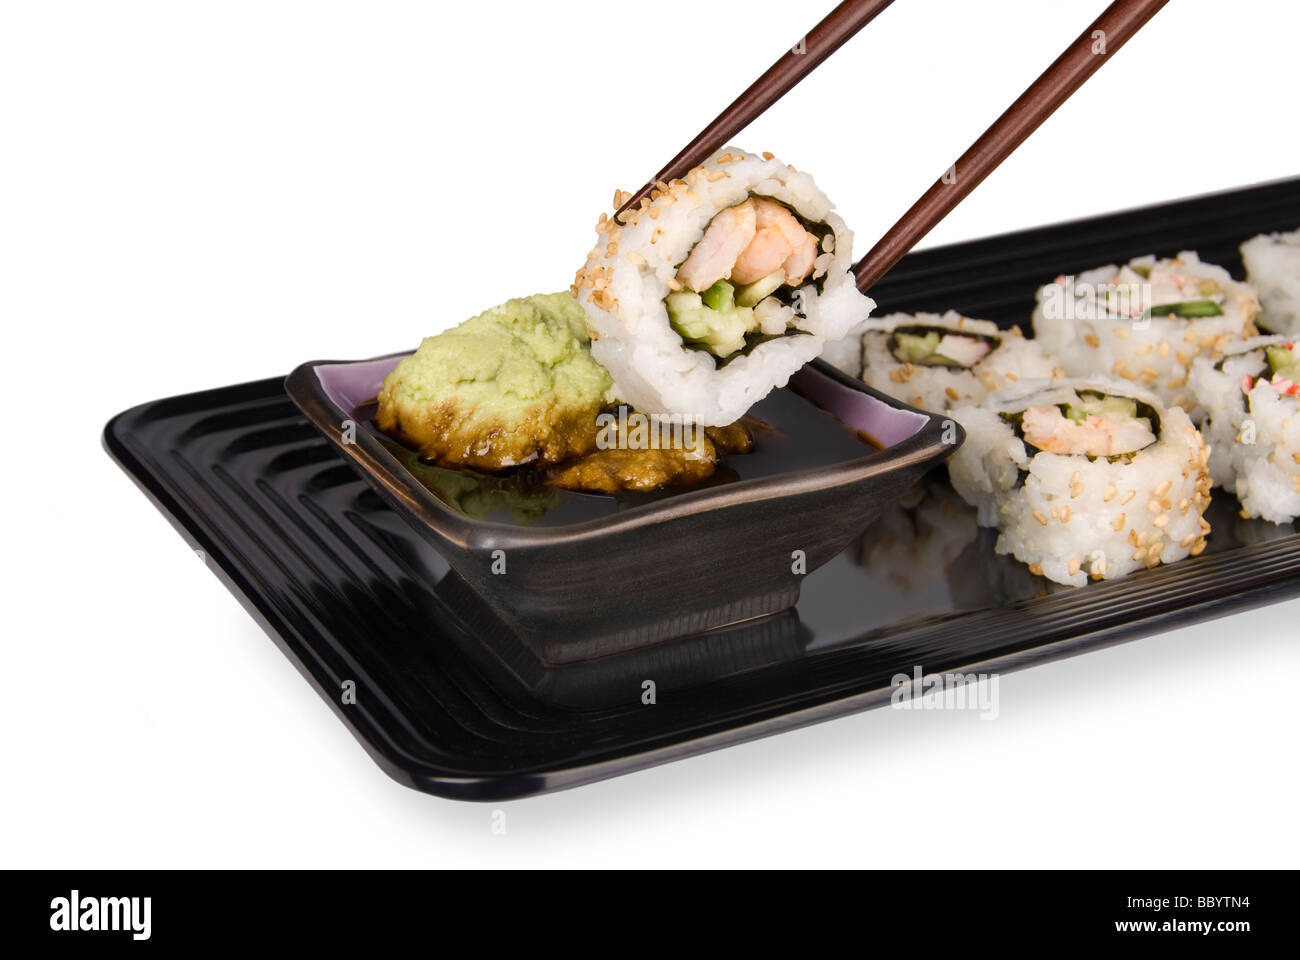 A fresh sushi roll of crab and fish being dipped into wasabi and soy sauce using chopsticks and an elegant serving tray Stock Photo